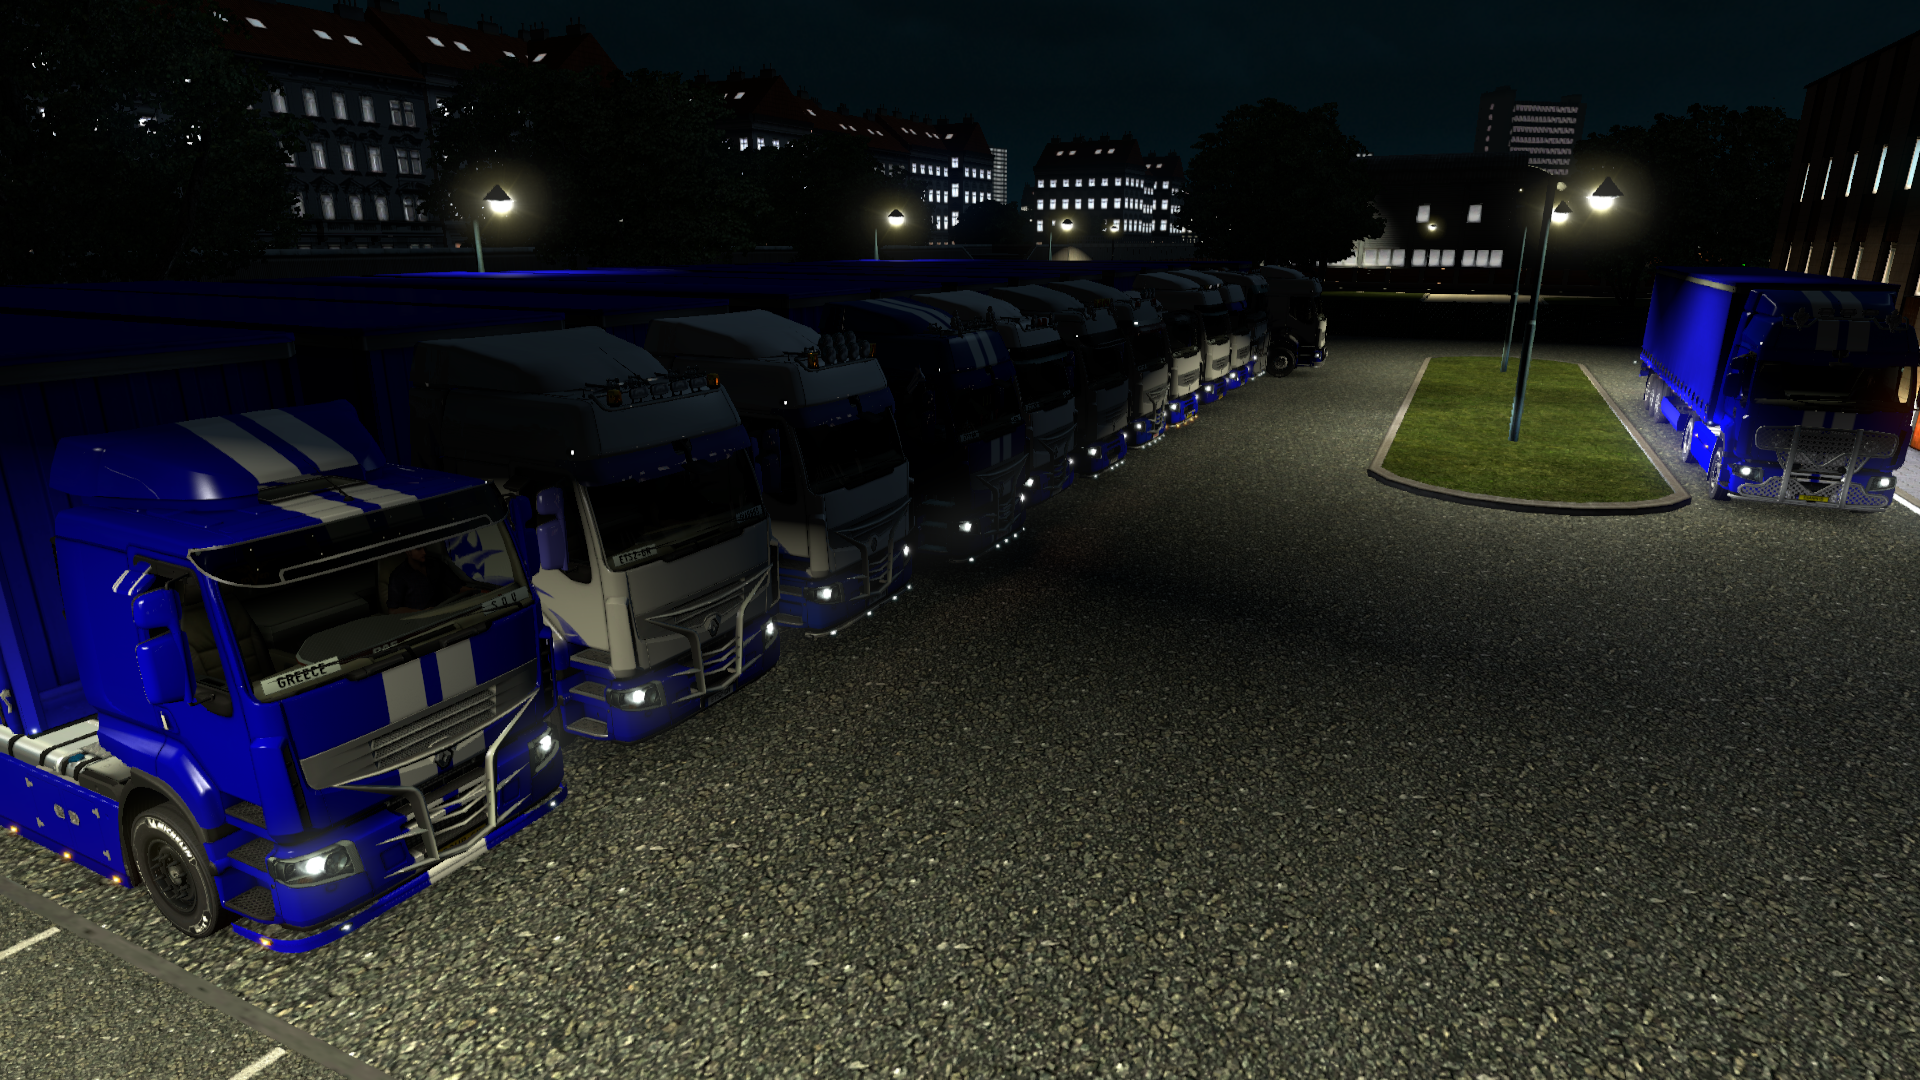 ets2_20180831_224543_00.png